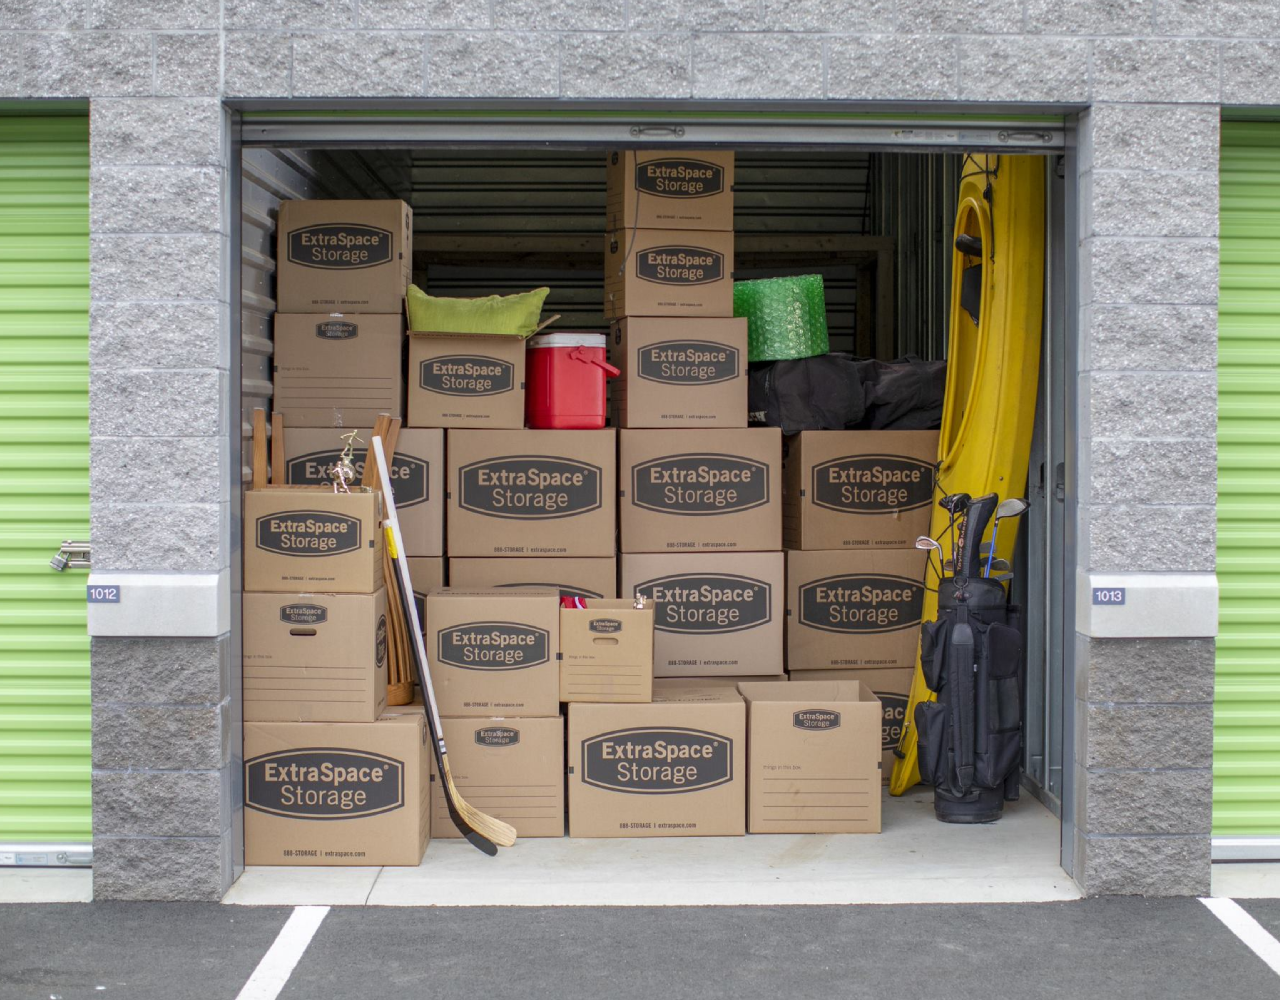 WHAT TO LOOK FOR IN RELIABLE MOVING STORAGE